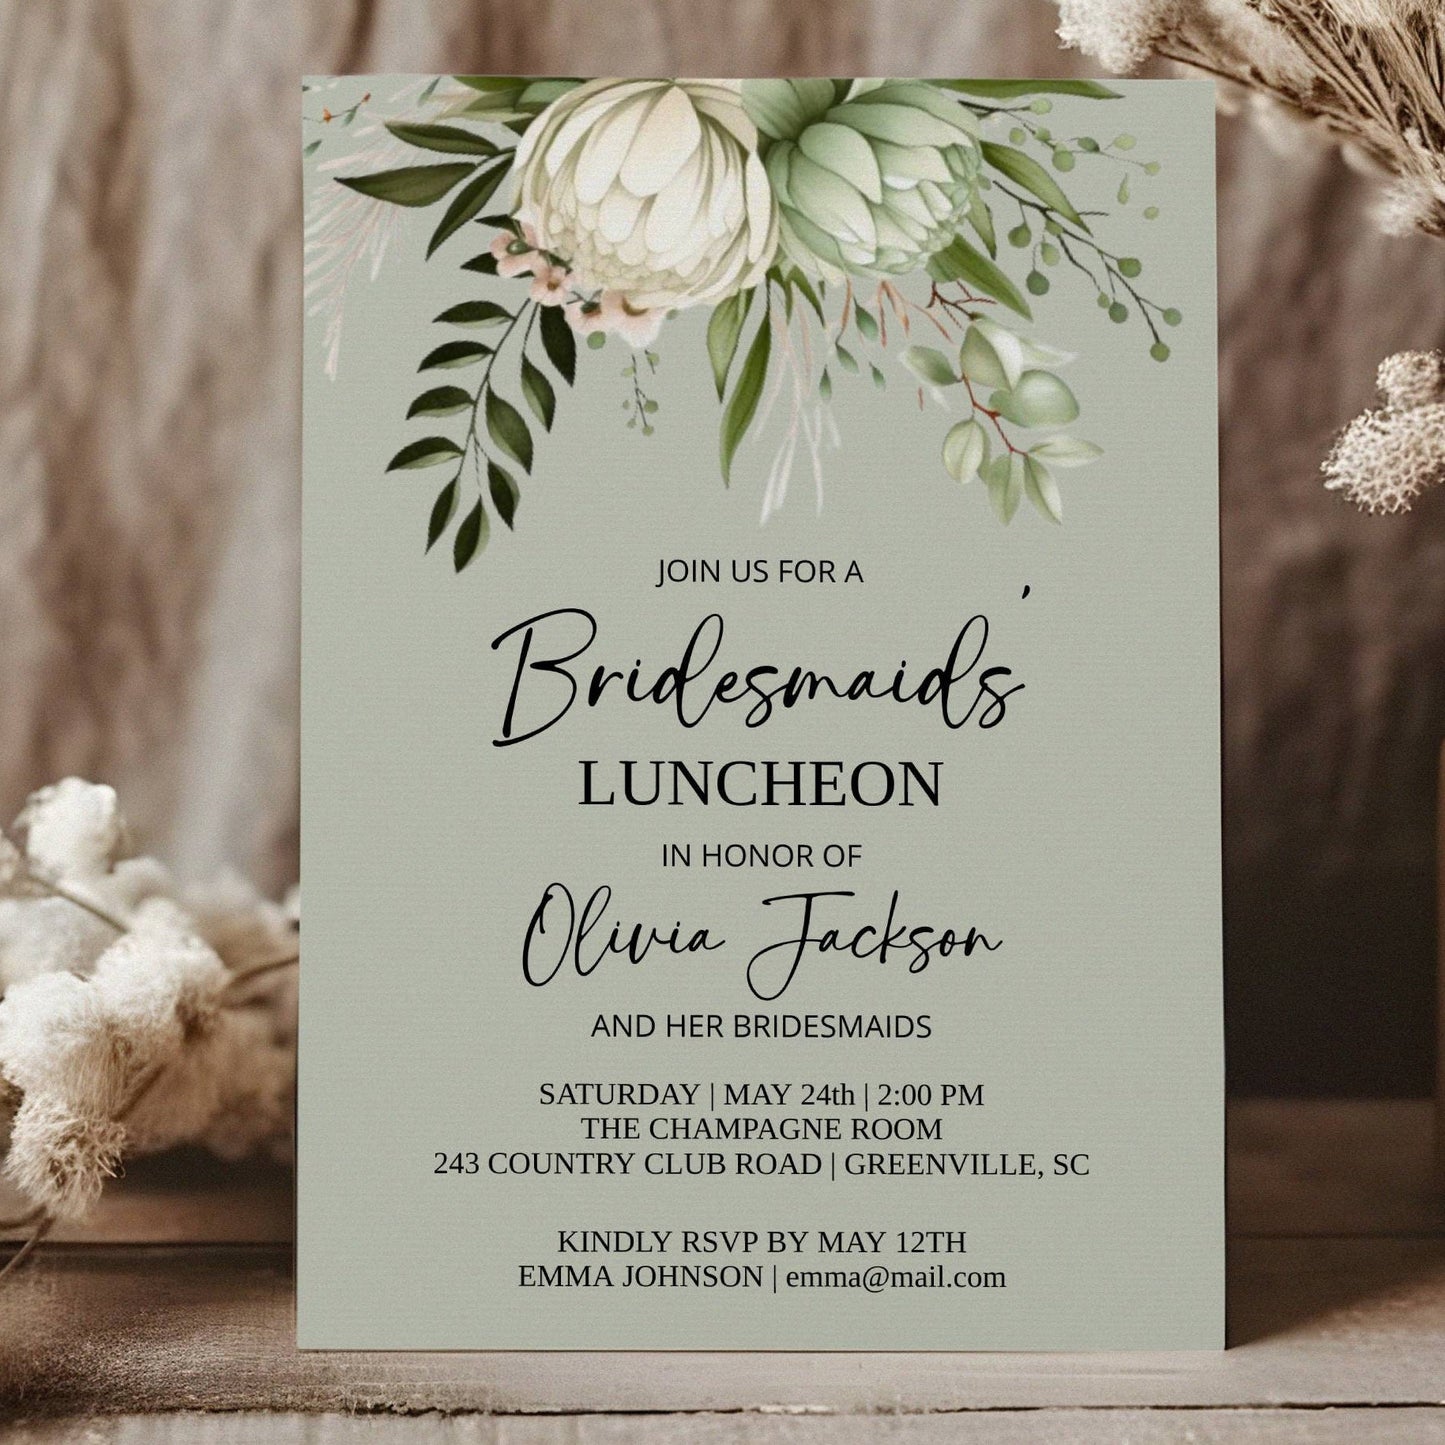 Bridesmaid Luncheon Invitation, Bridal Luncheon Invite, Brunch Invite, Brunch Invitation, Luncheon, Editable Template, Instant, Green Floral